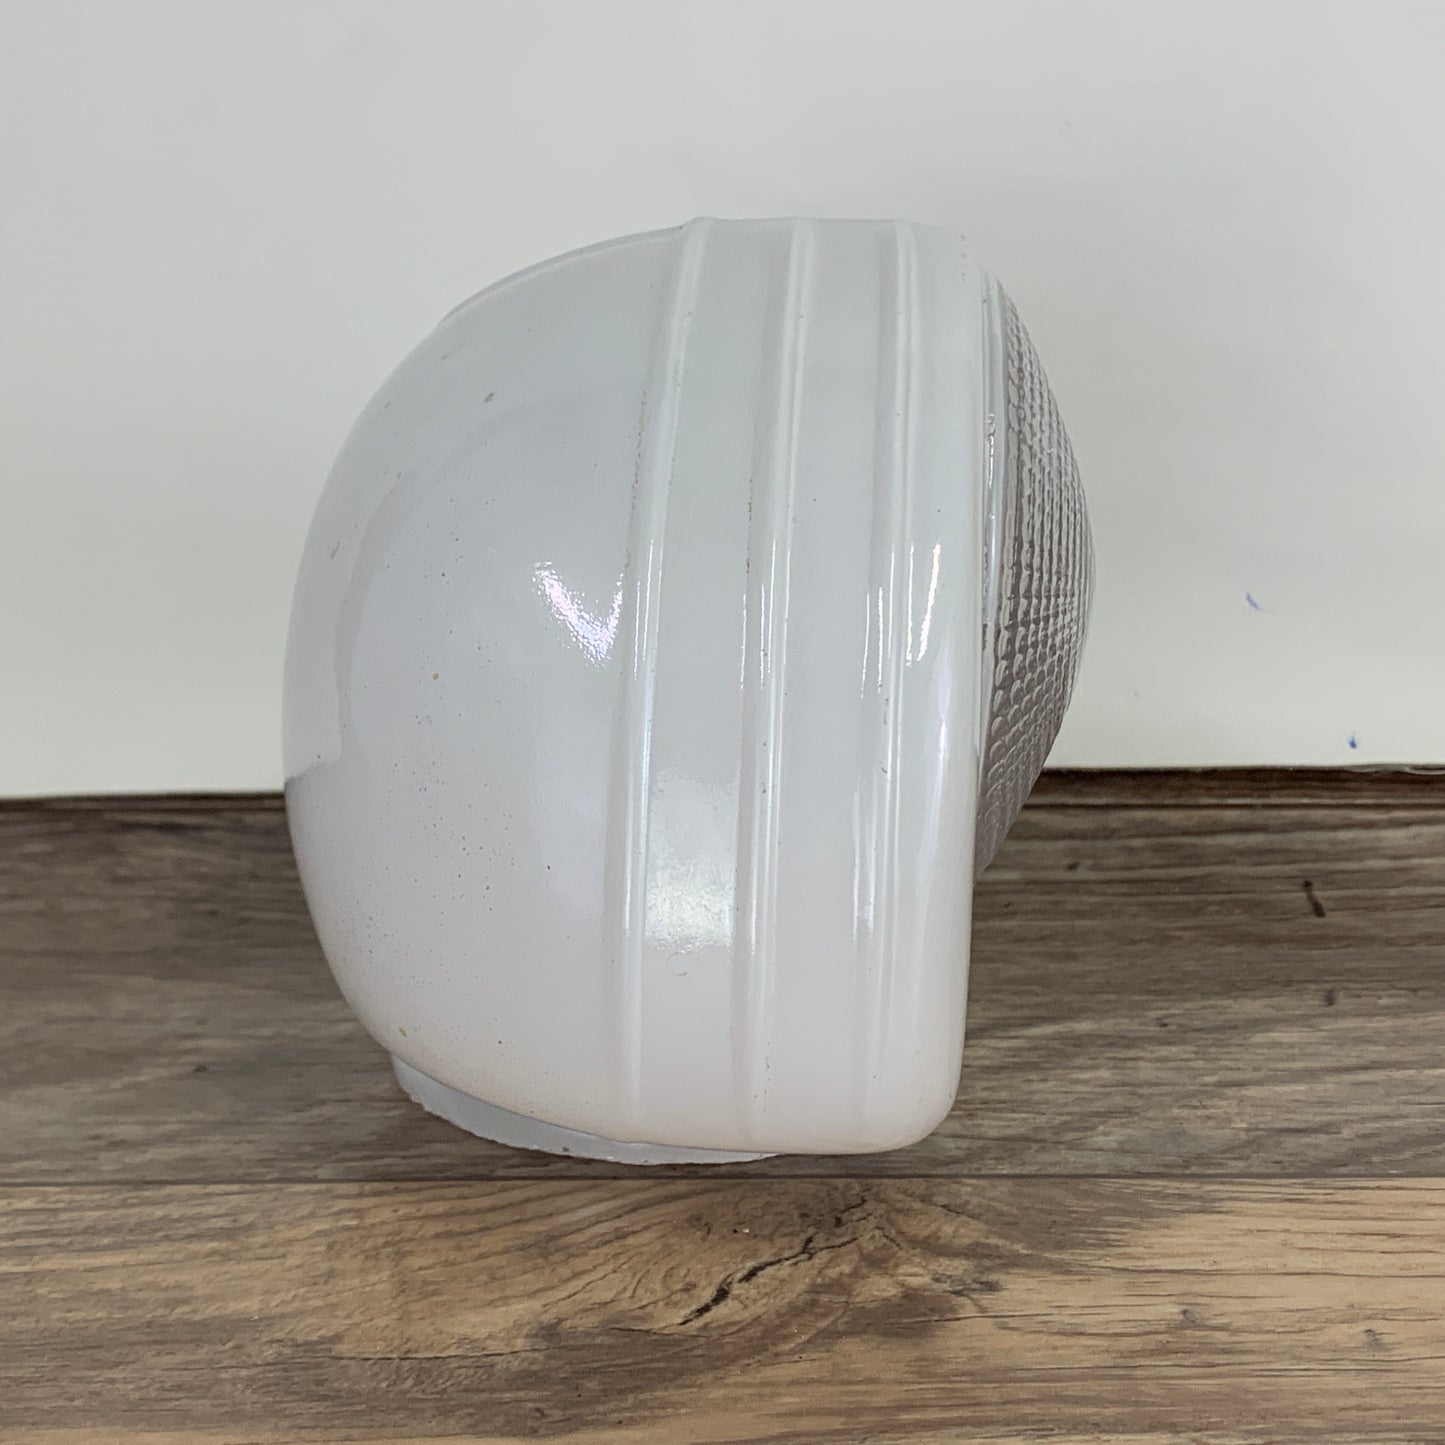 Vintage Porch Light Shade, Bathroom Light Cover, White and Clear Lamp Shade